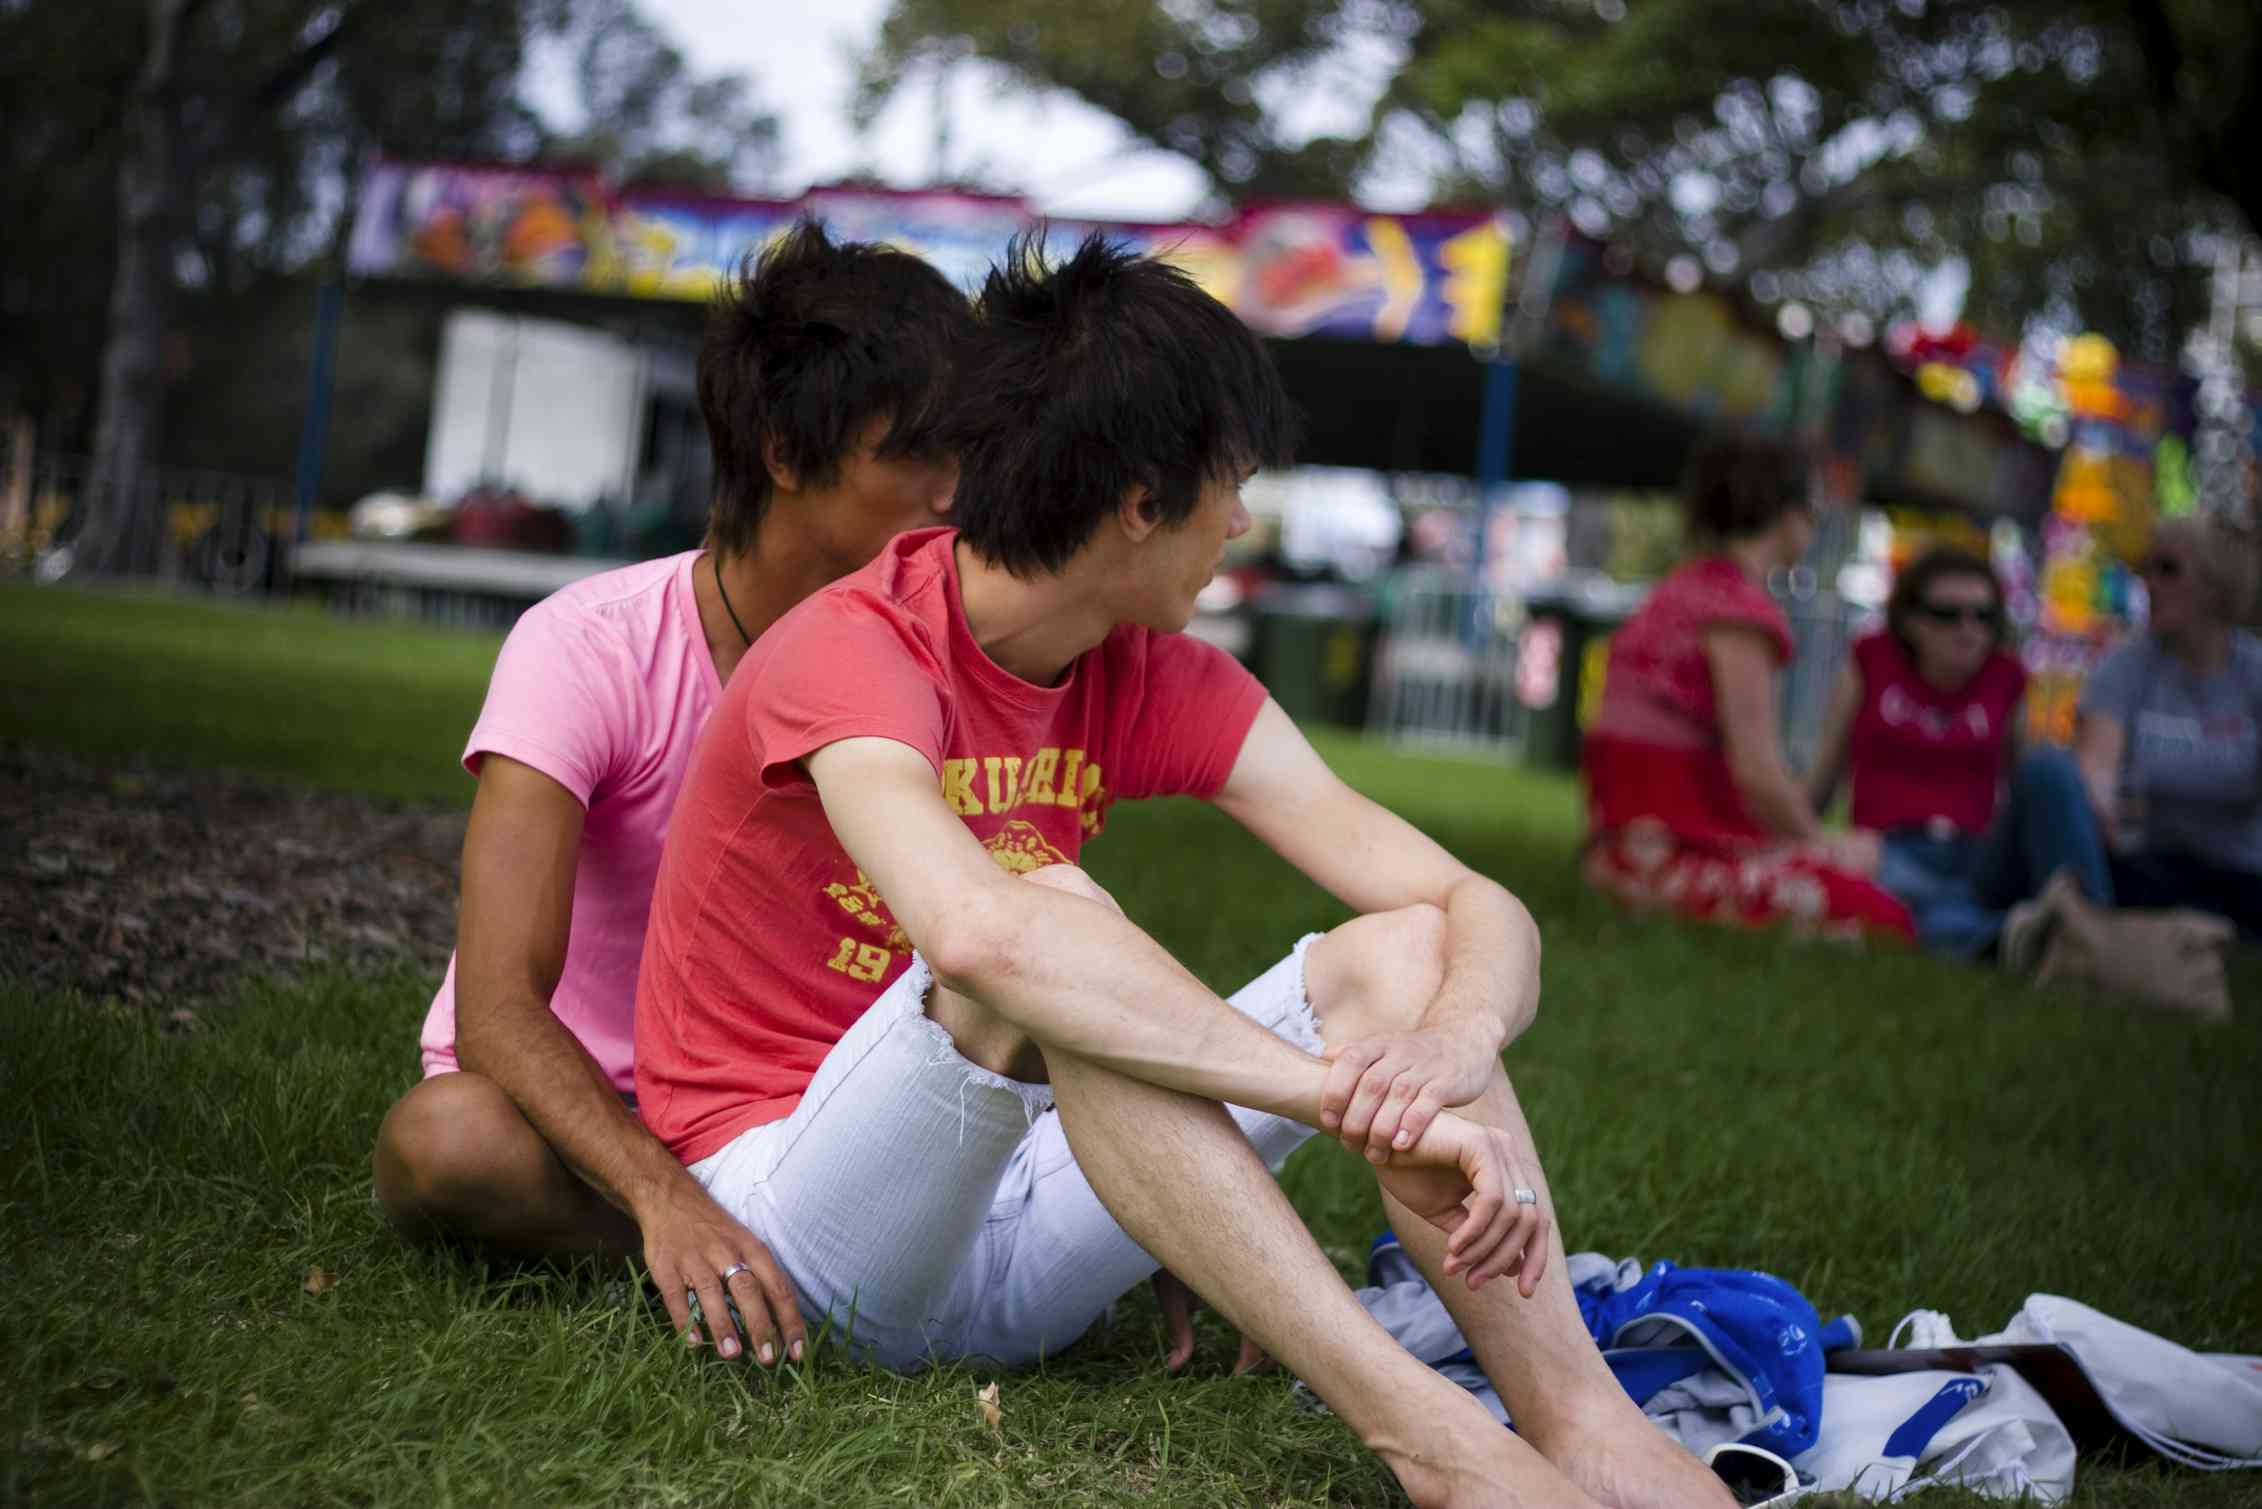 A gay couple sitting on a lawn.